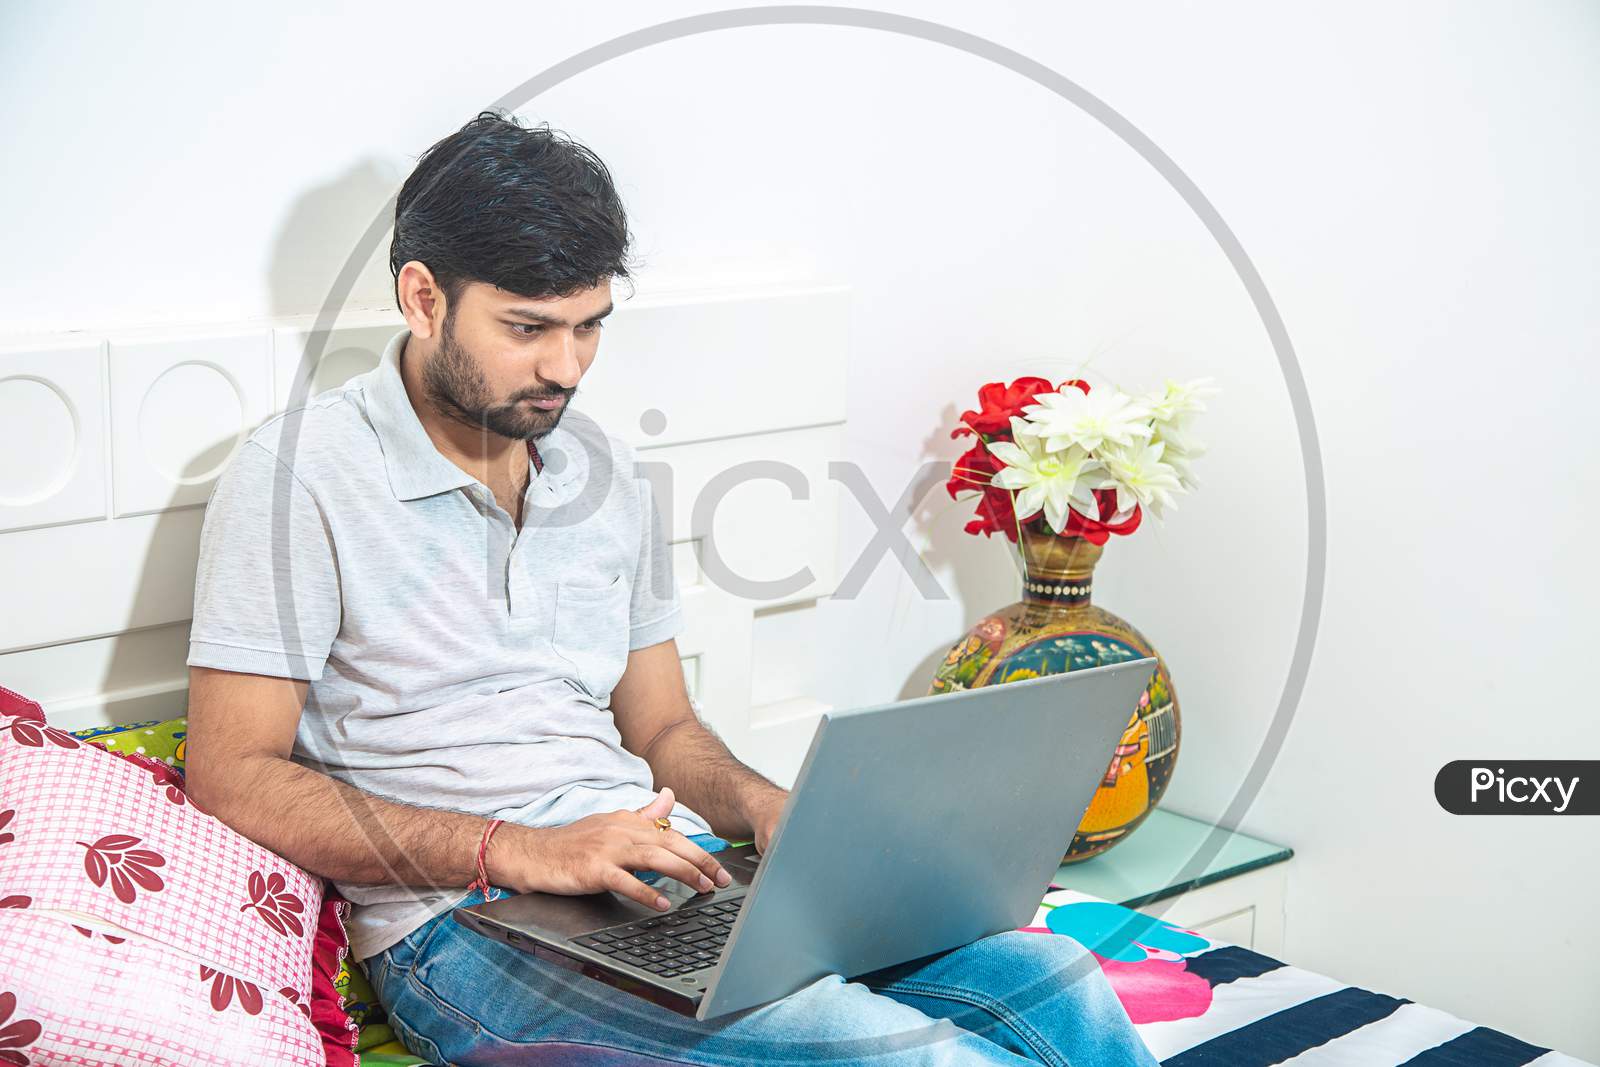 Close Up Of Young Indian Man Busy Working On His Laptop Doing Office Work While Relaxing On Bed In Bedroom, Freelancer Working From Home. Young Male Student Typing On Computer Wearing Casual Cloths.